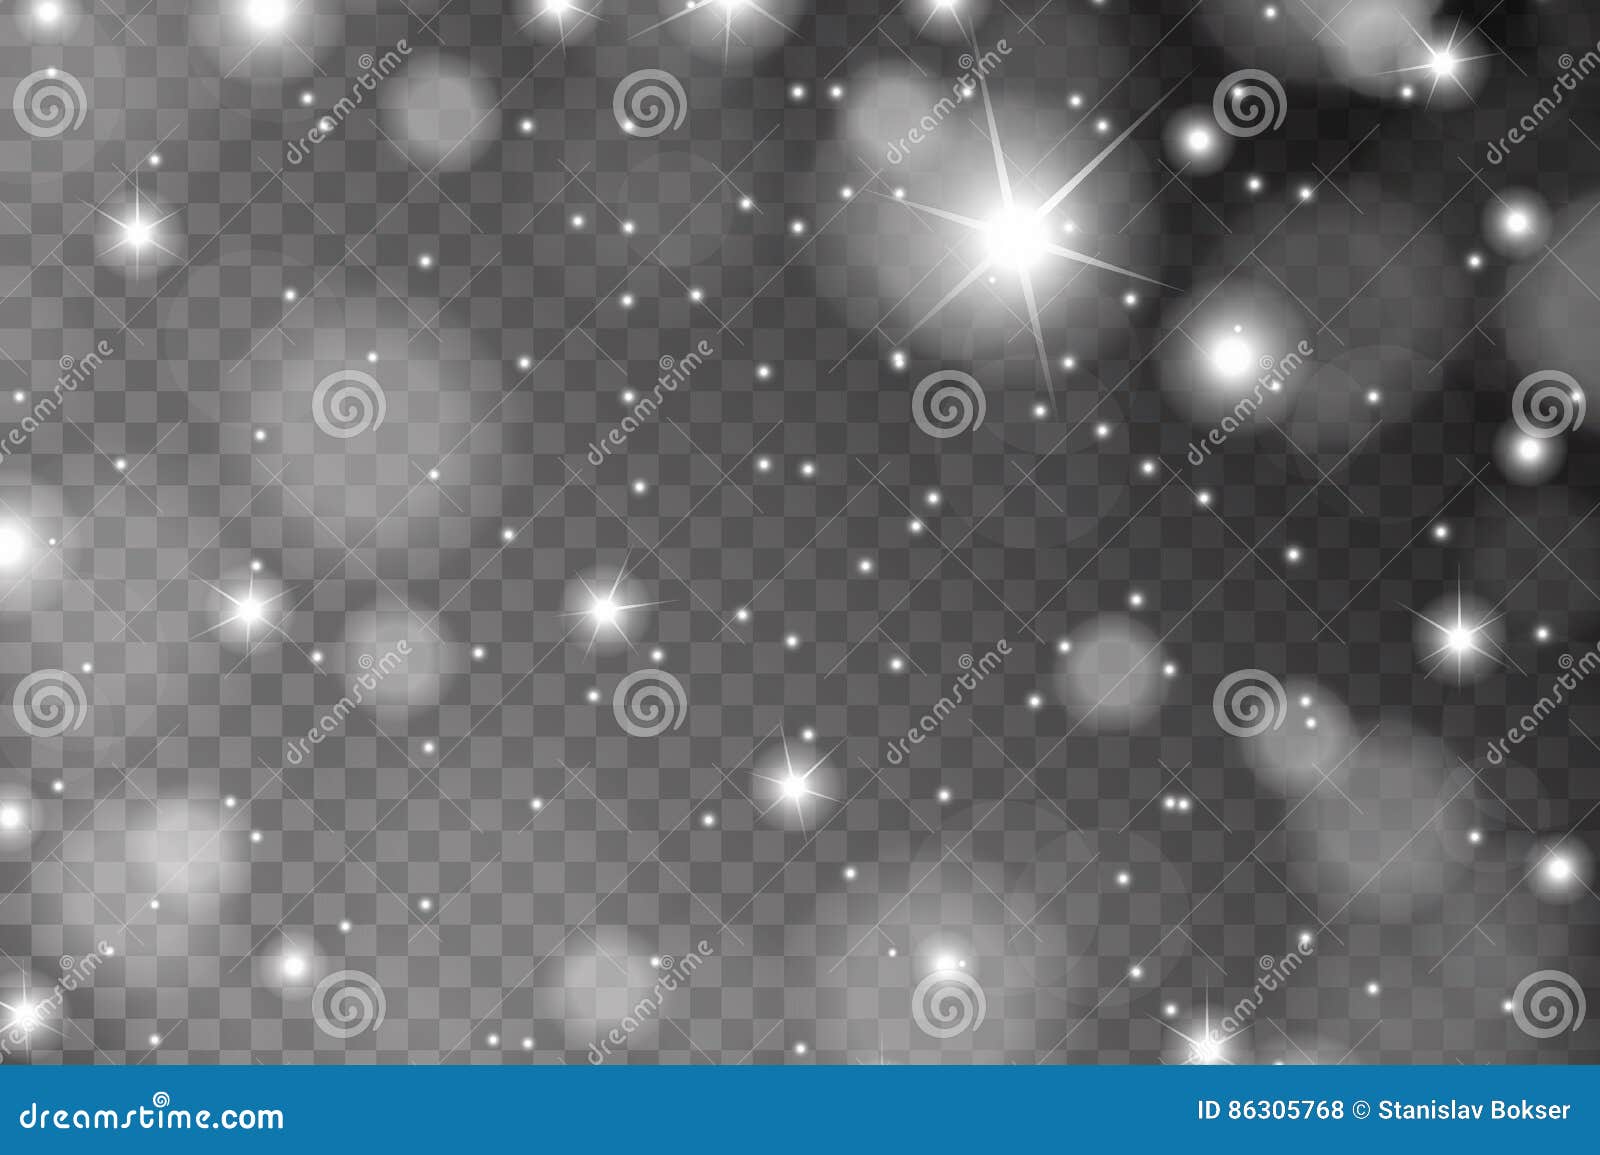 abstract shiny white sparkles and flares effect pattern  on transparent background